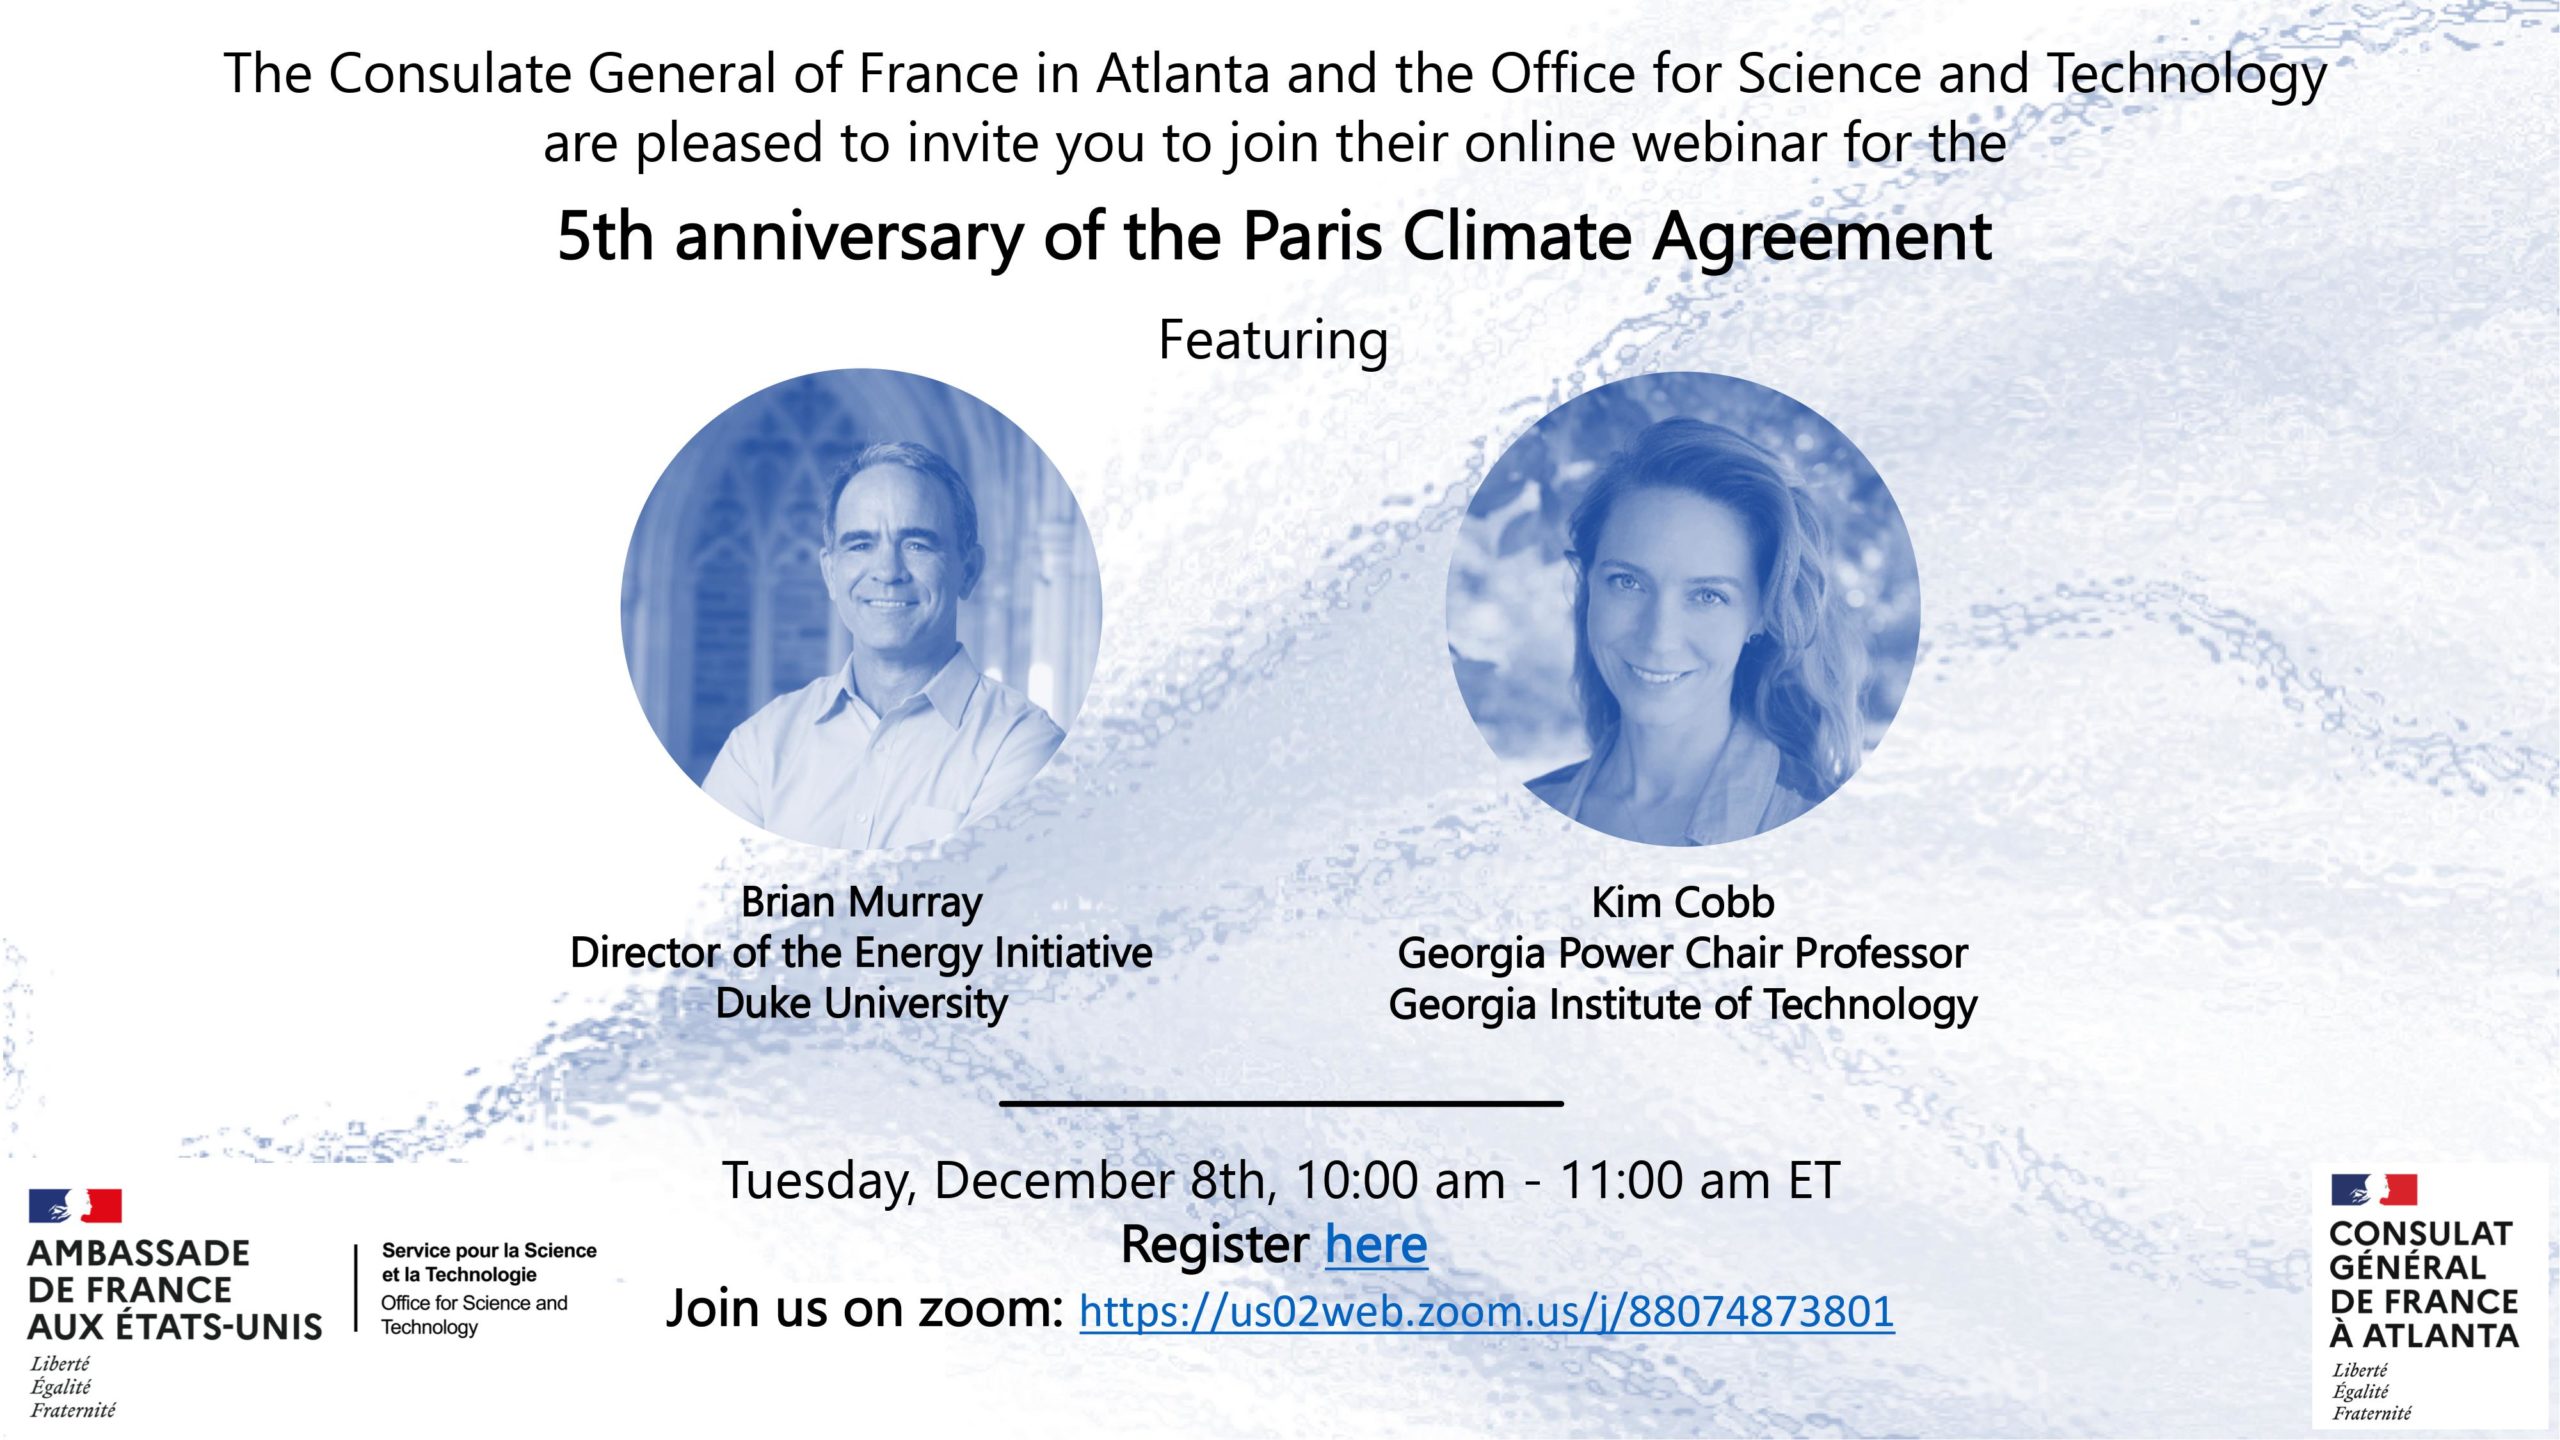 Tuesday, December 8th: 5th anniversary of the Paris Climate Agreement – Atlanta